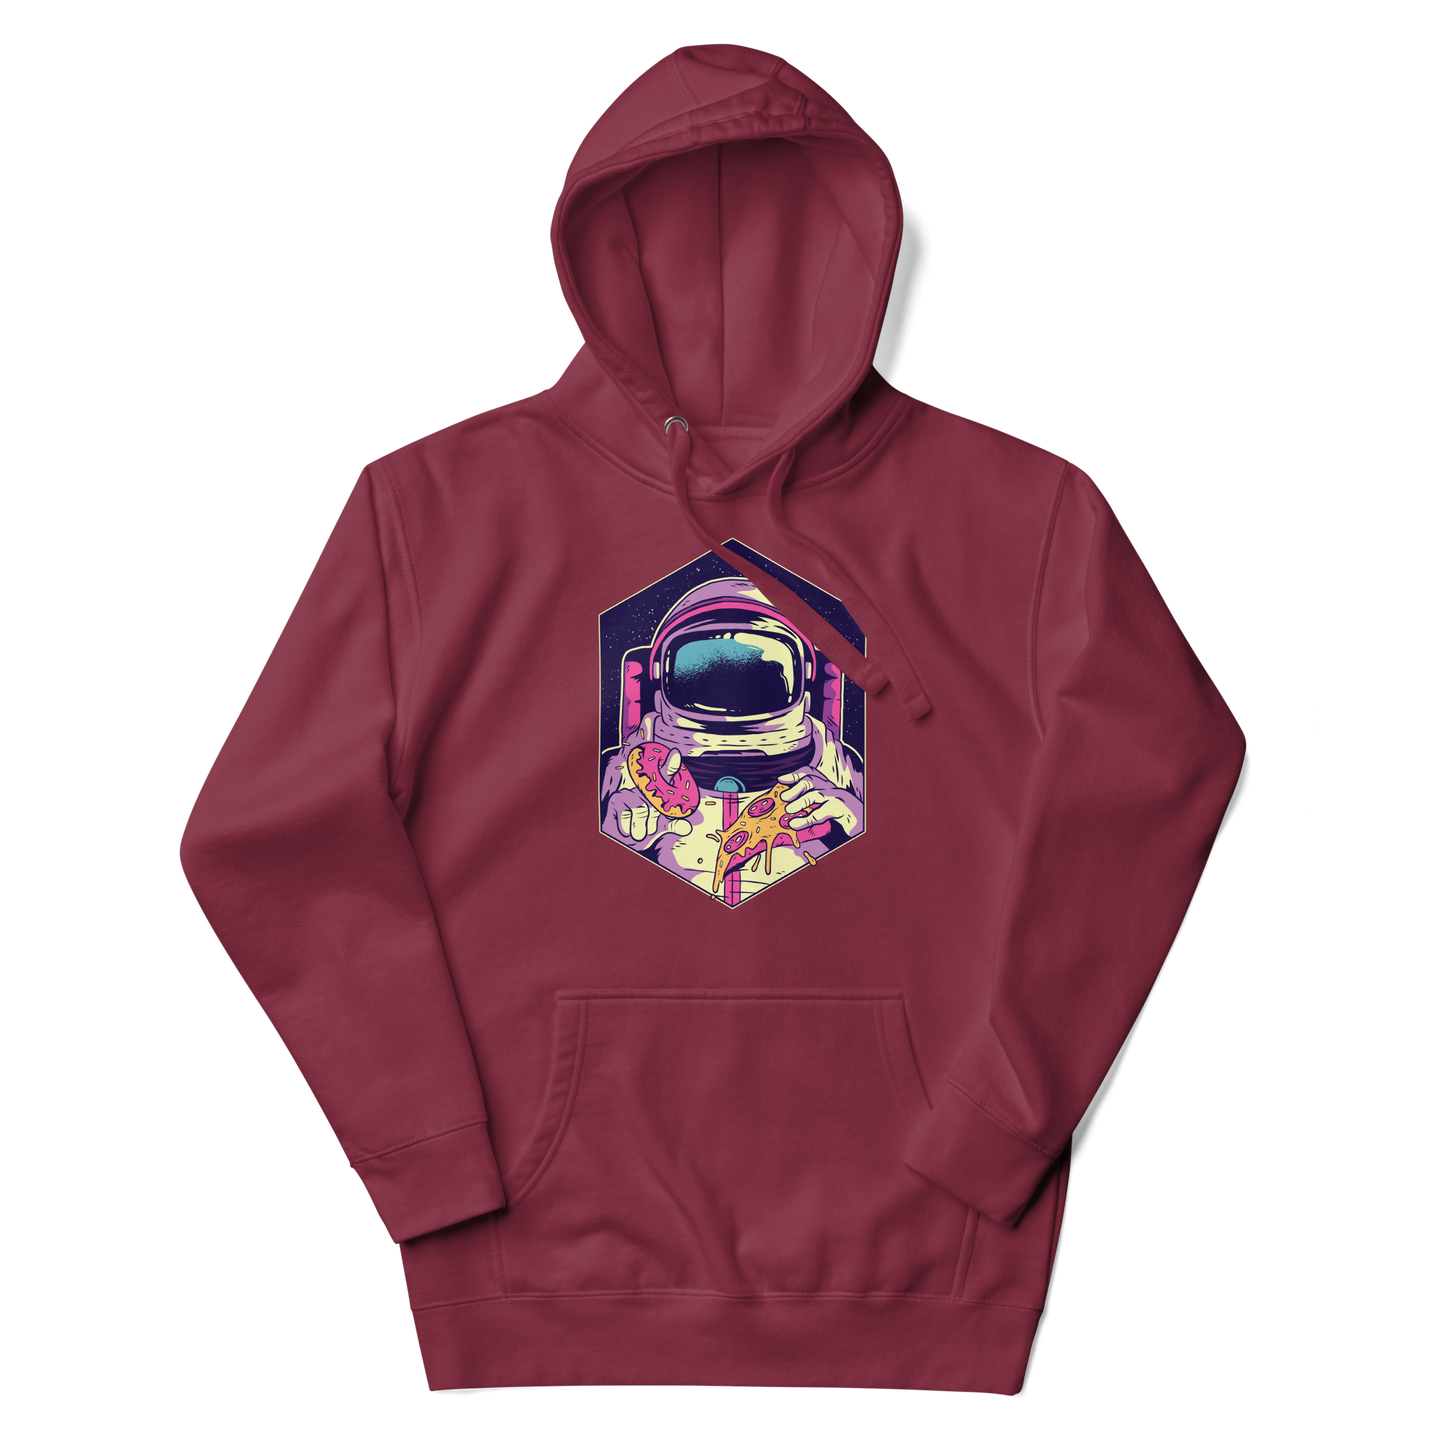 Astronaut Eating Donut and Pizza | Unisex Hoodie